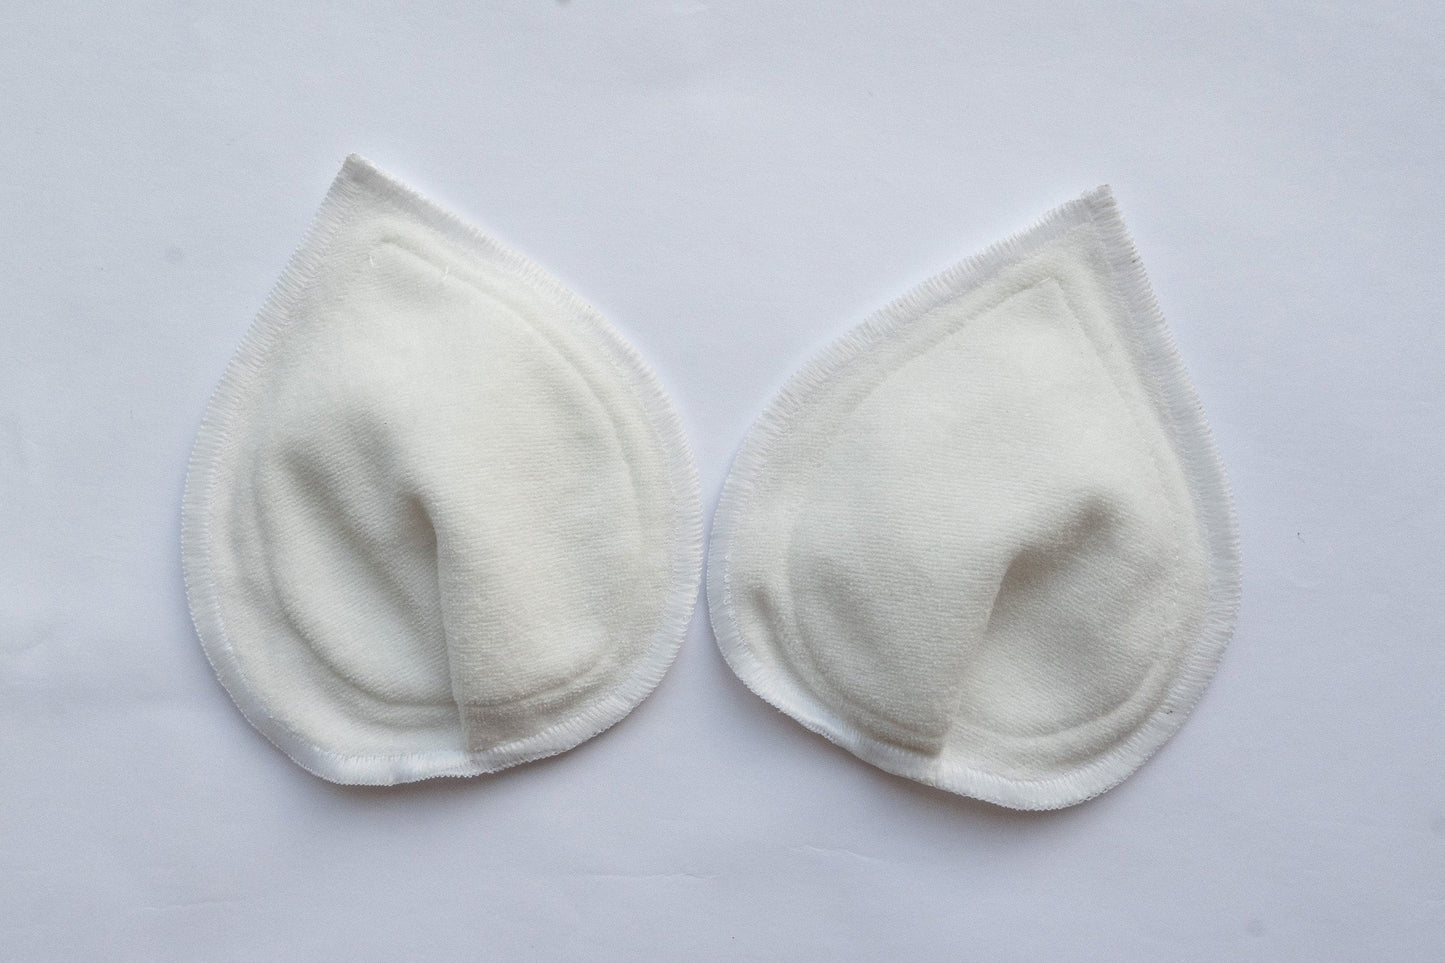 Safepad Breast Pads - RealReliefWay